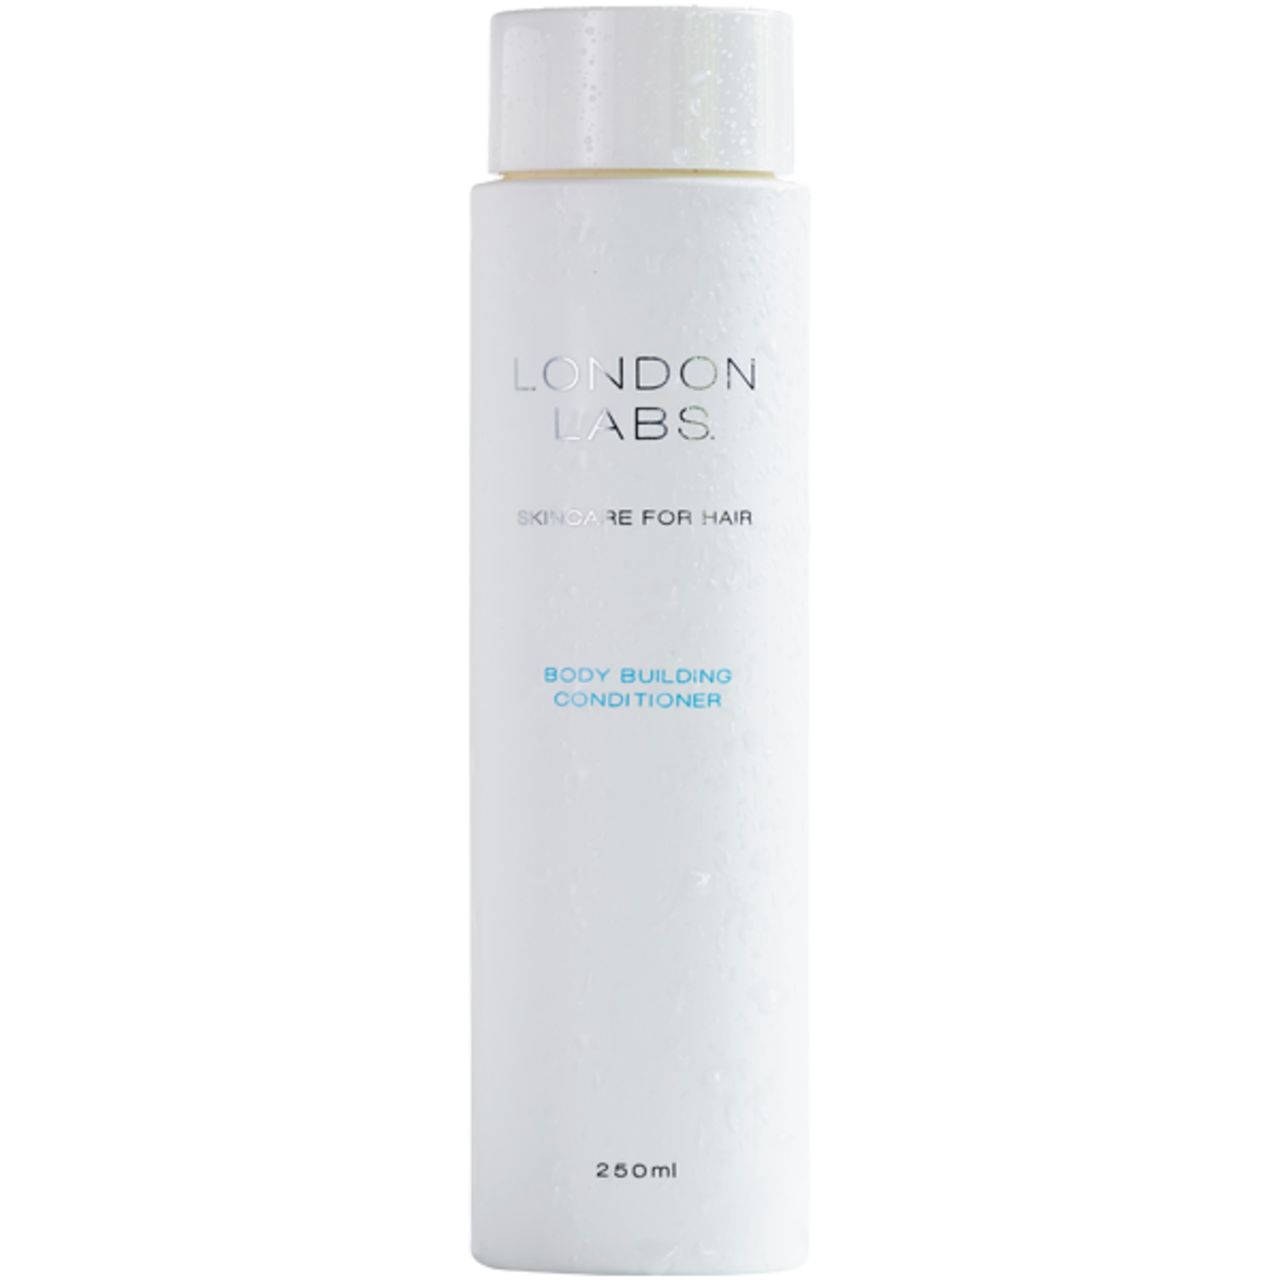 London Labs, Skincare for Hair Body Building Conditioner